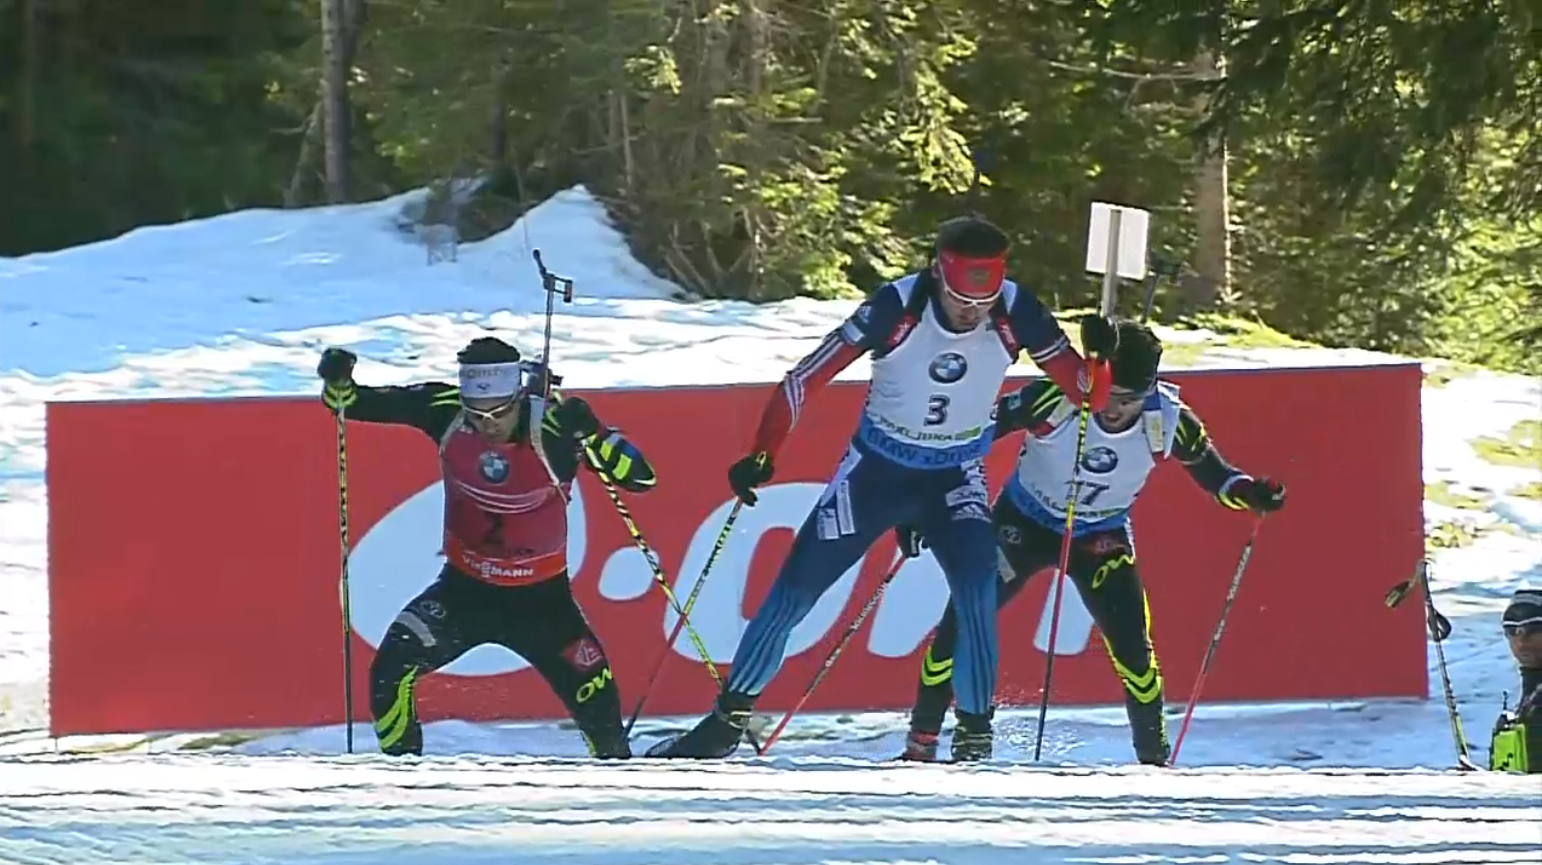 In Second-Ever Mass Start, Smith Clinches Ninth; Shipulin Causes Late Trip to Win in Pokljuka